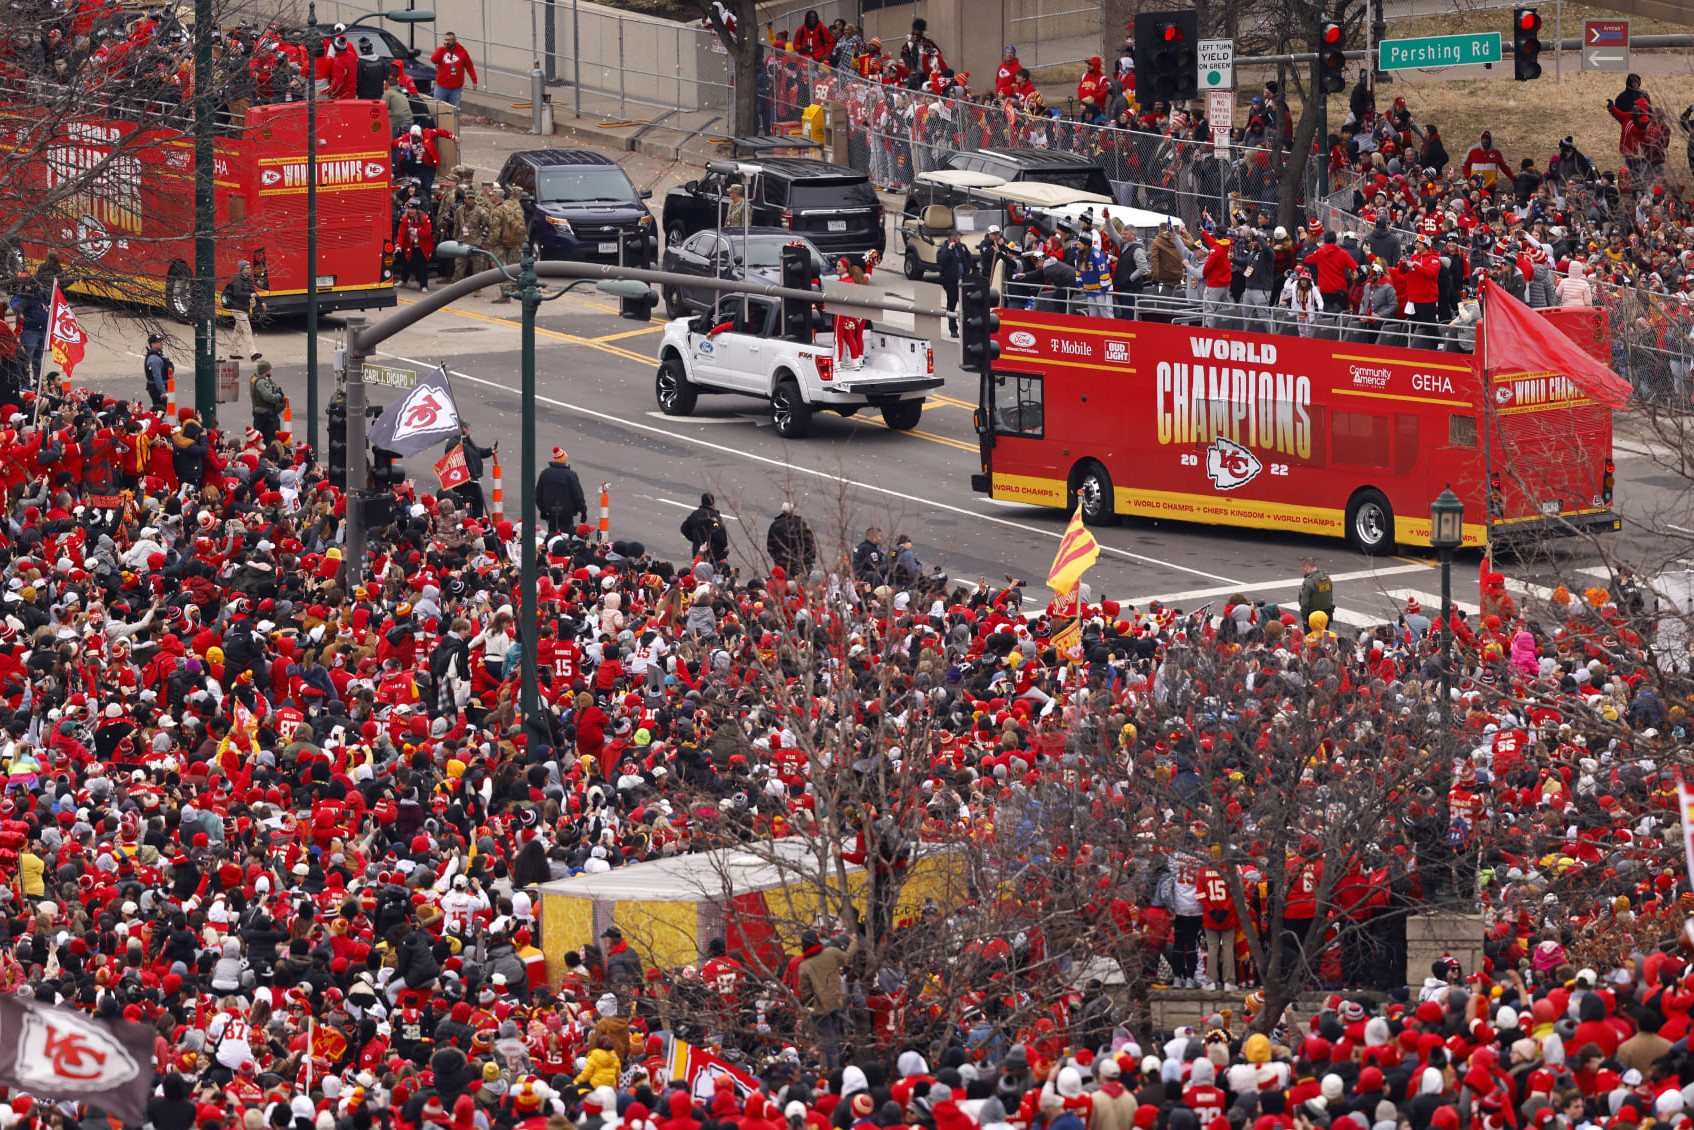 Best moments from Chiefs' championship parade